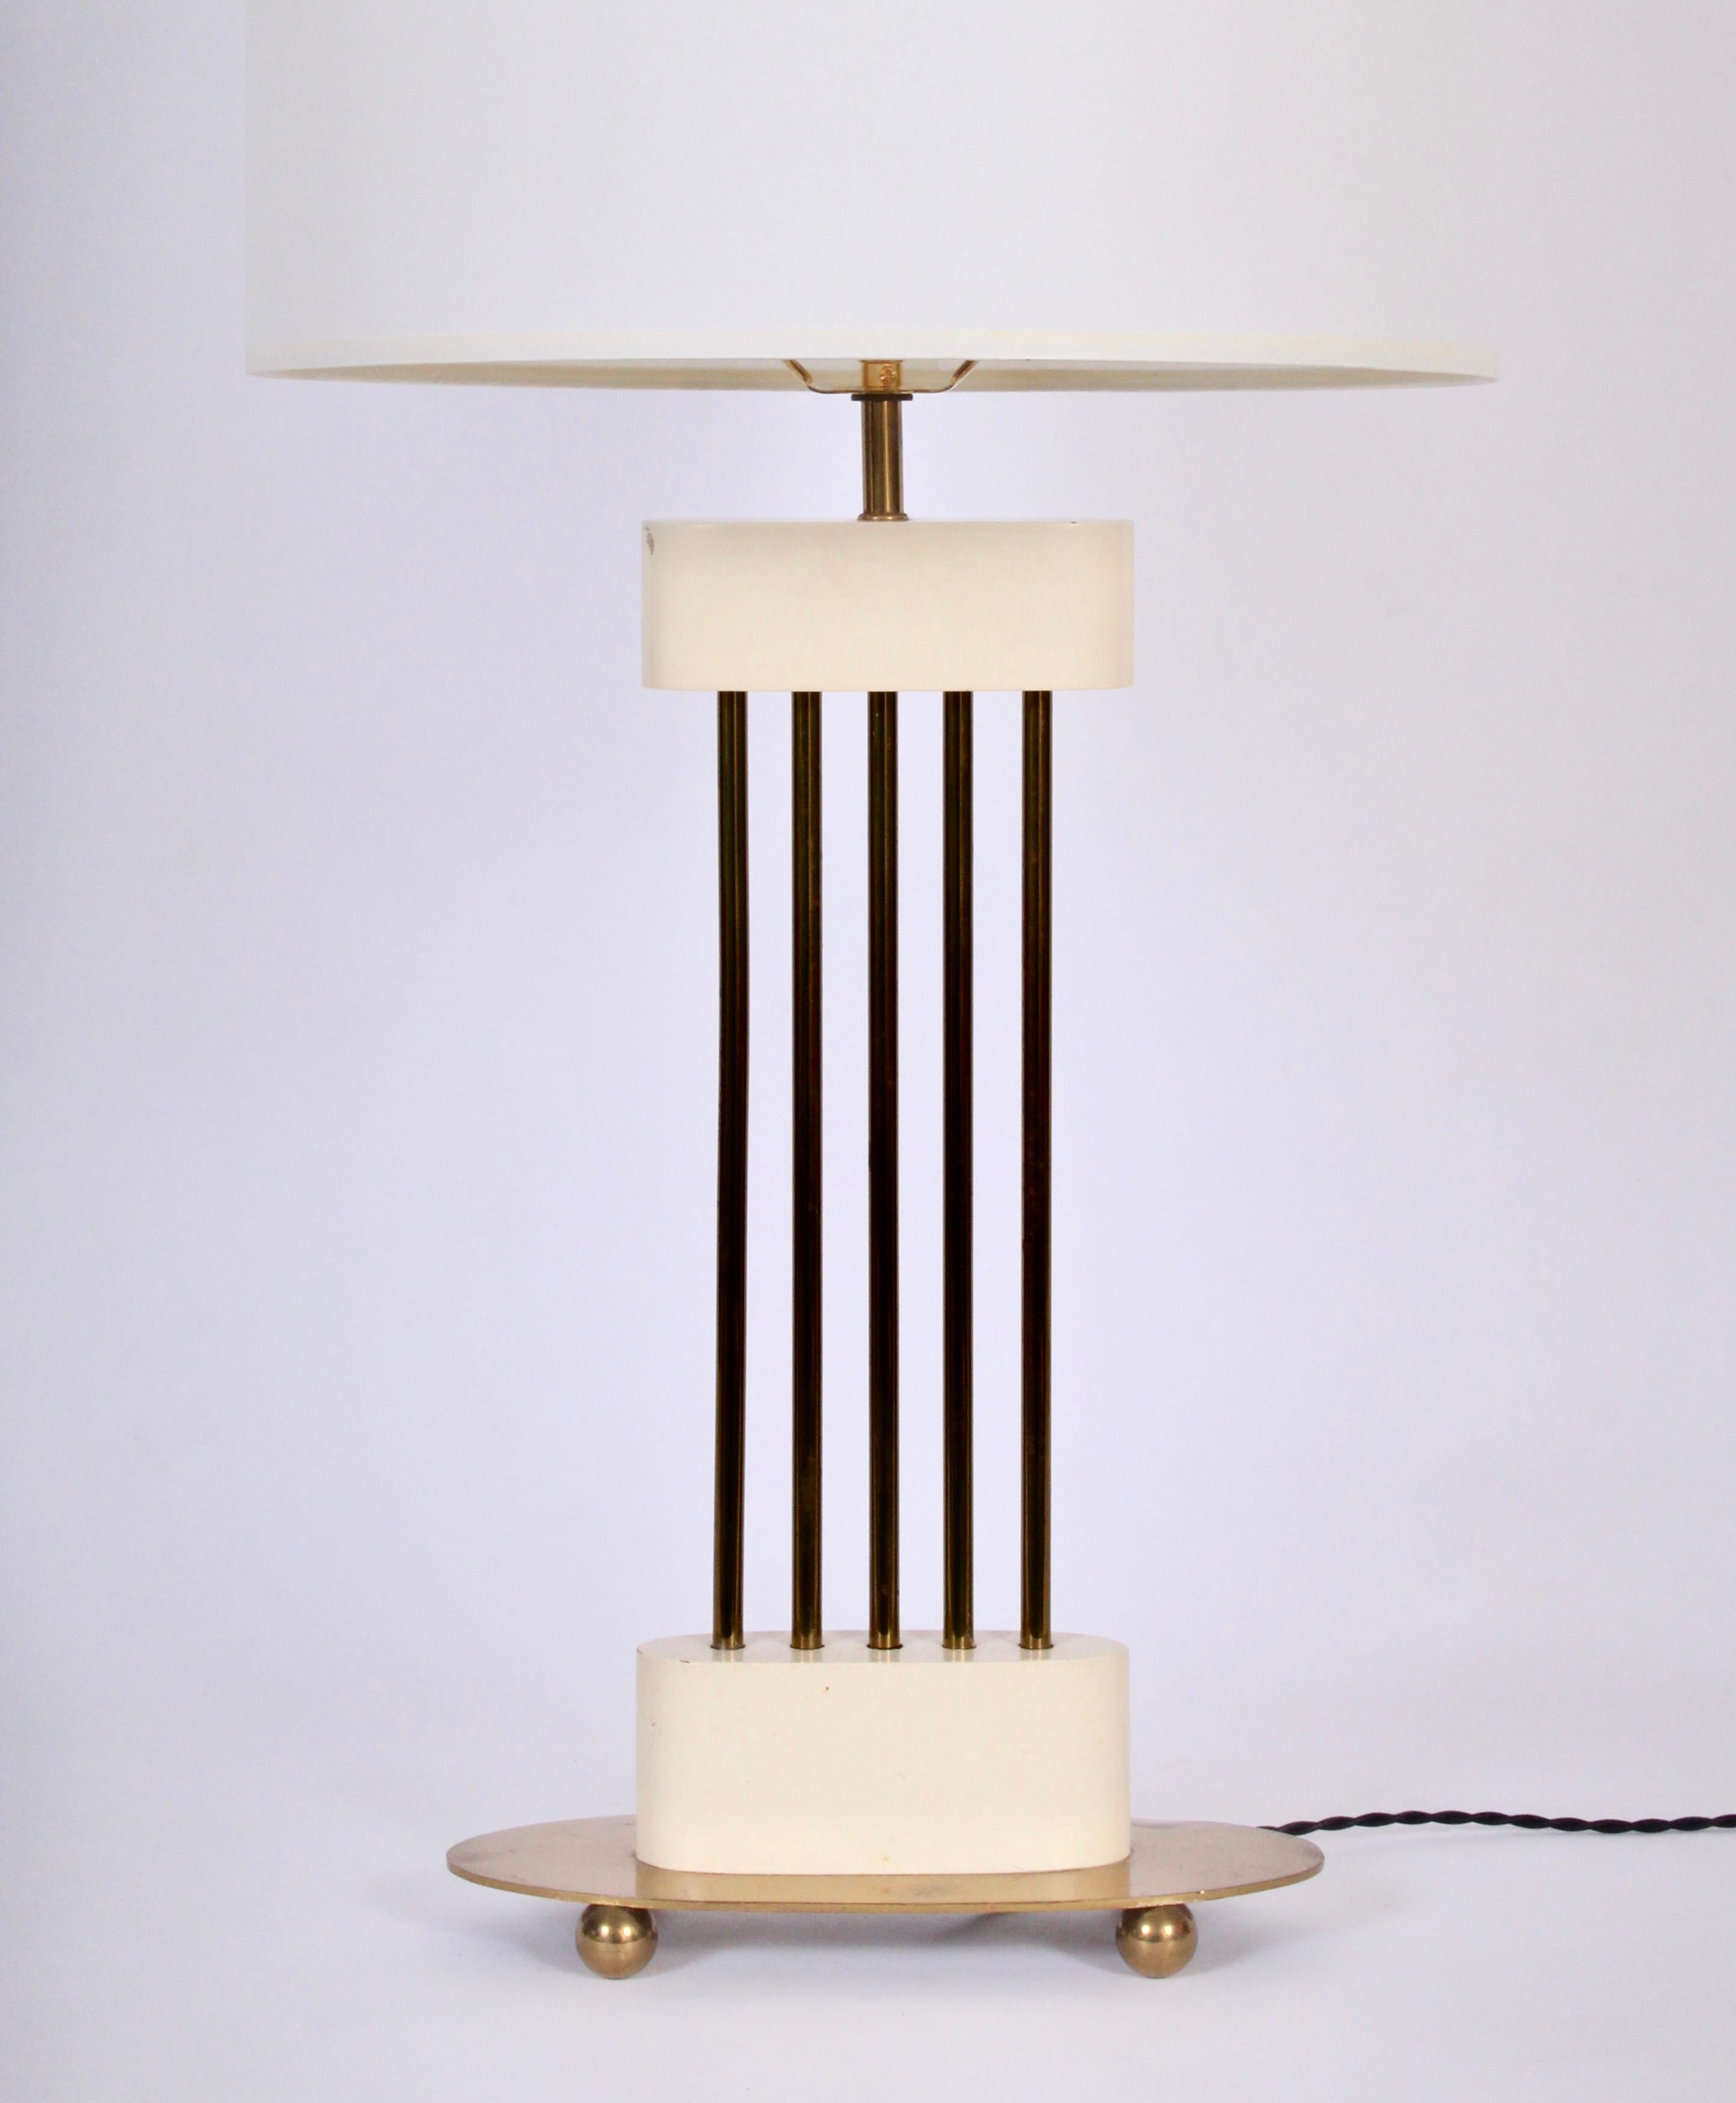 Wood Parzinger Style Mutual Sunset Cream & Brass Spindle Columns Table Lamp, 1950s For Sale